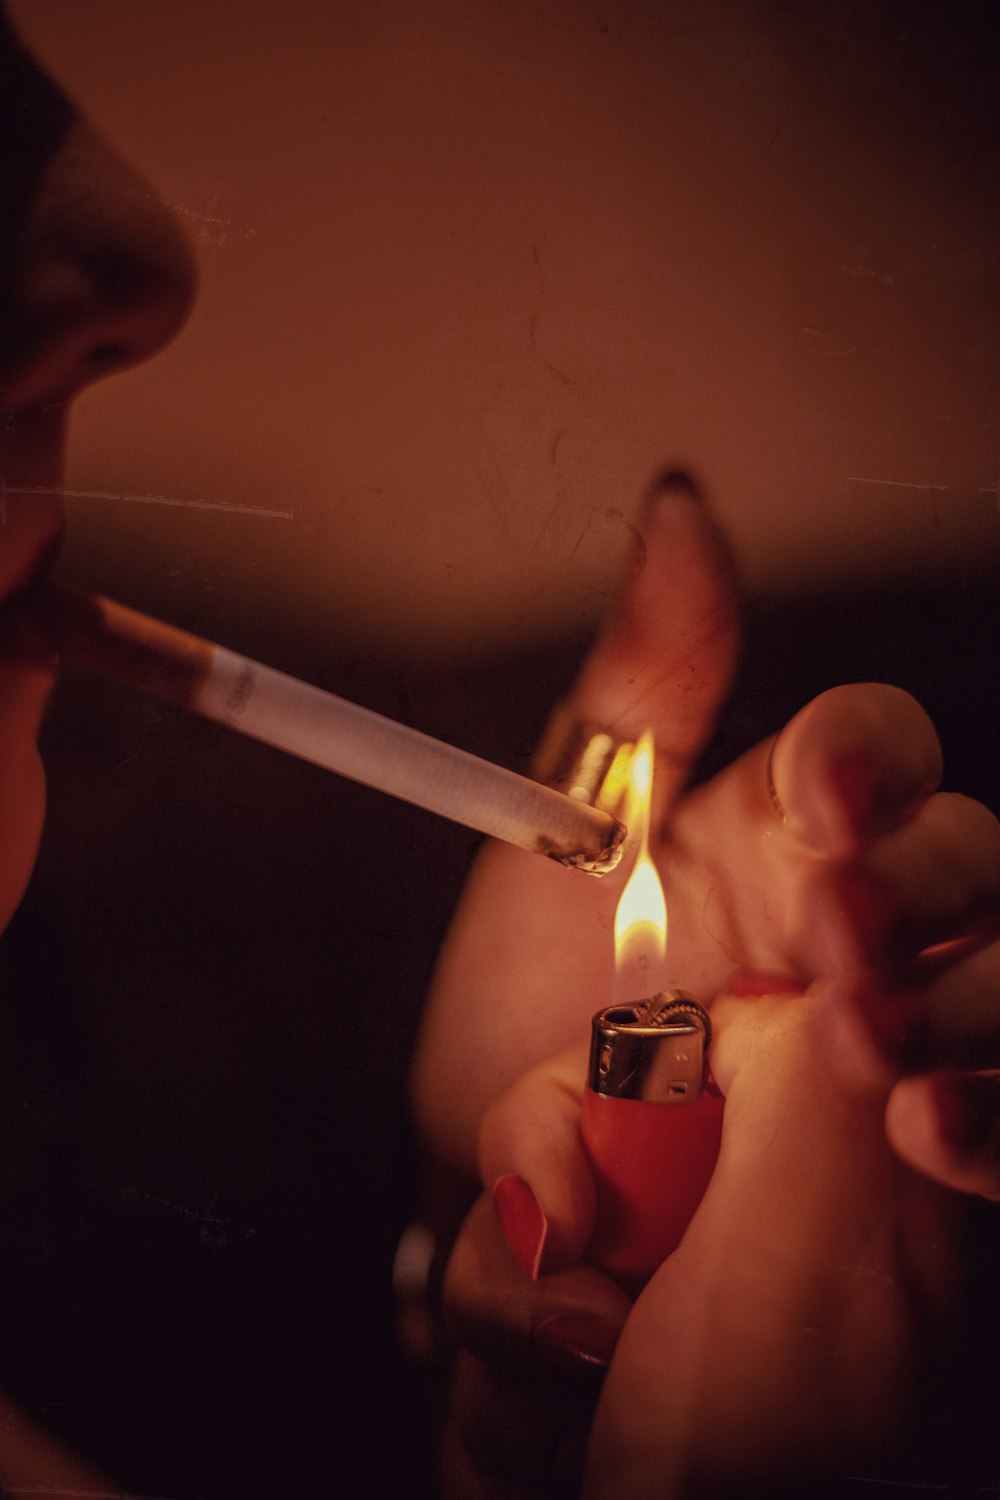 a woman lighting a cigarette with a lighter in her hand